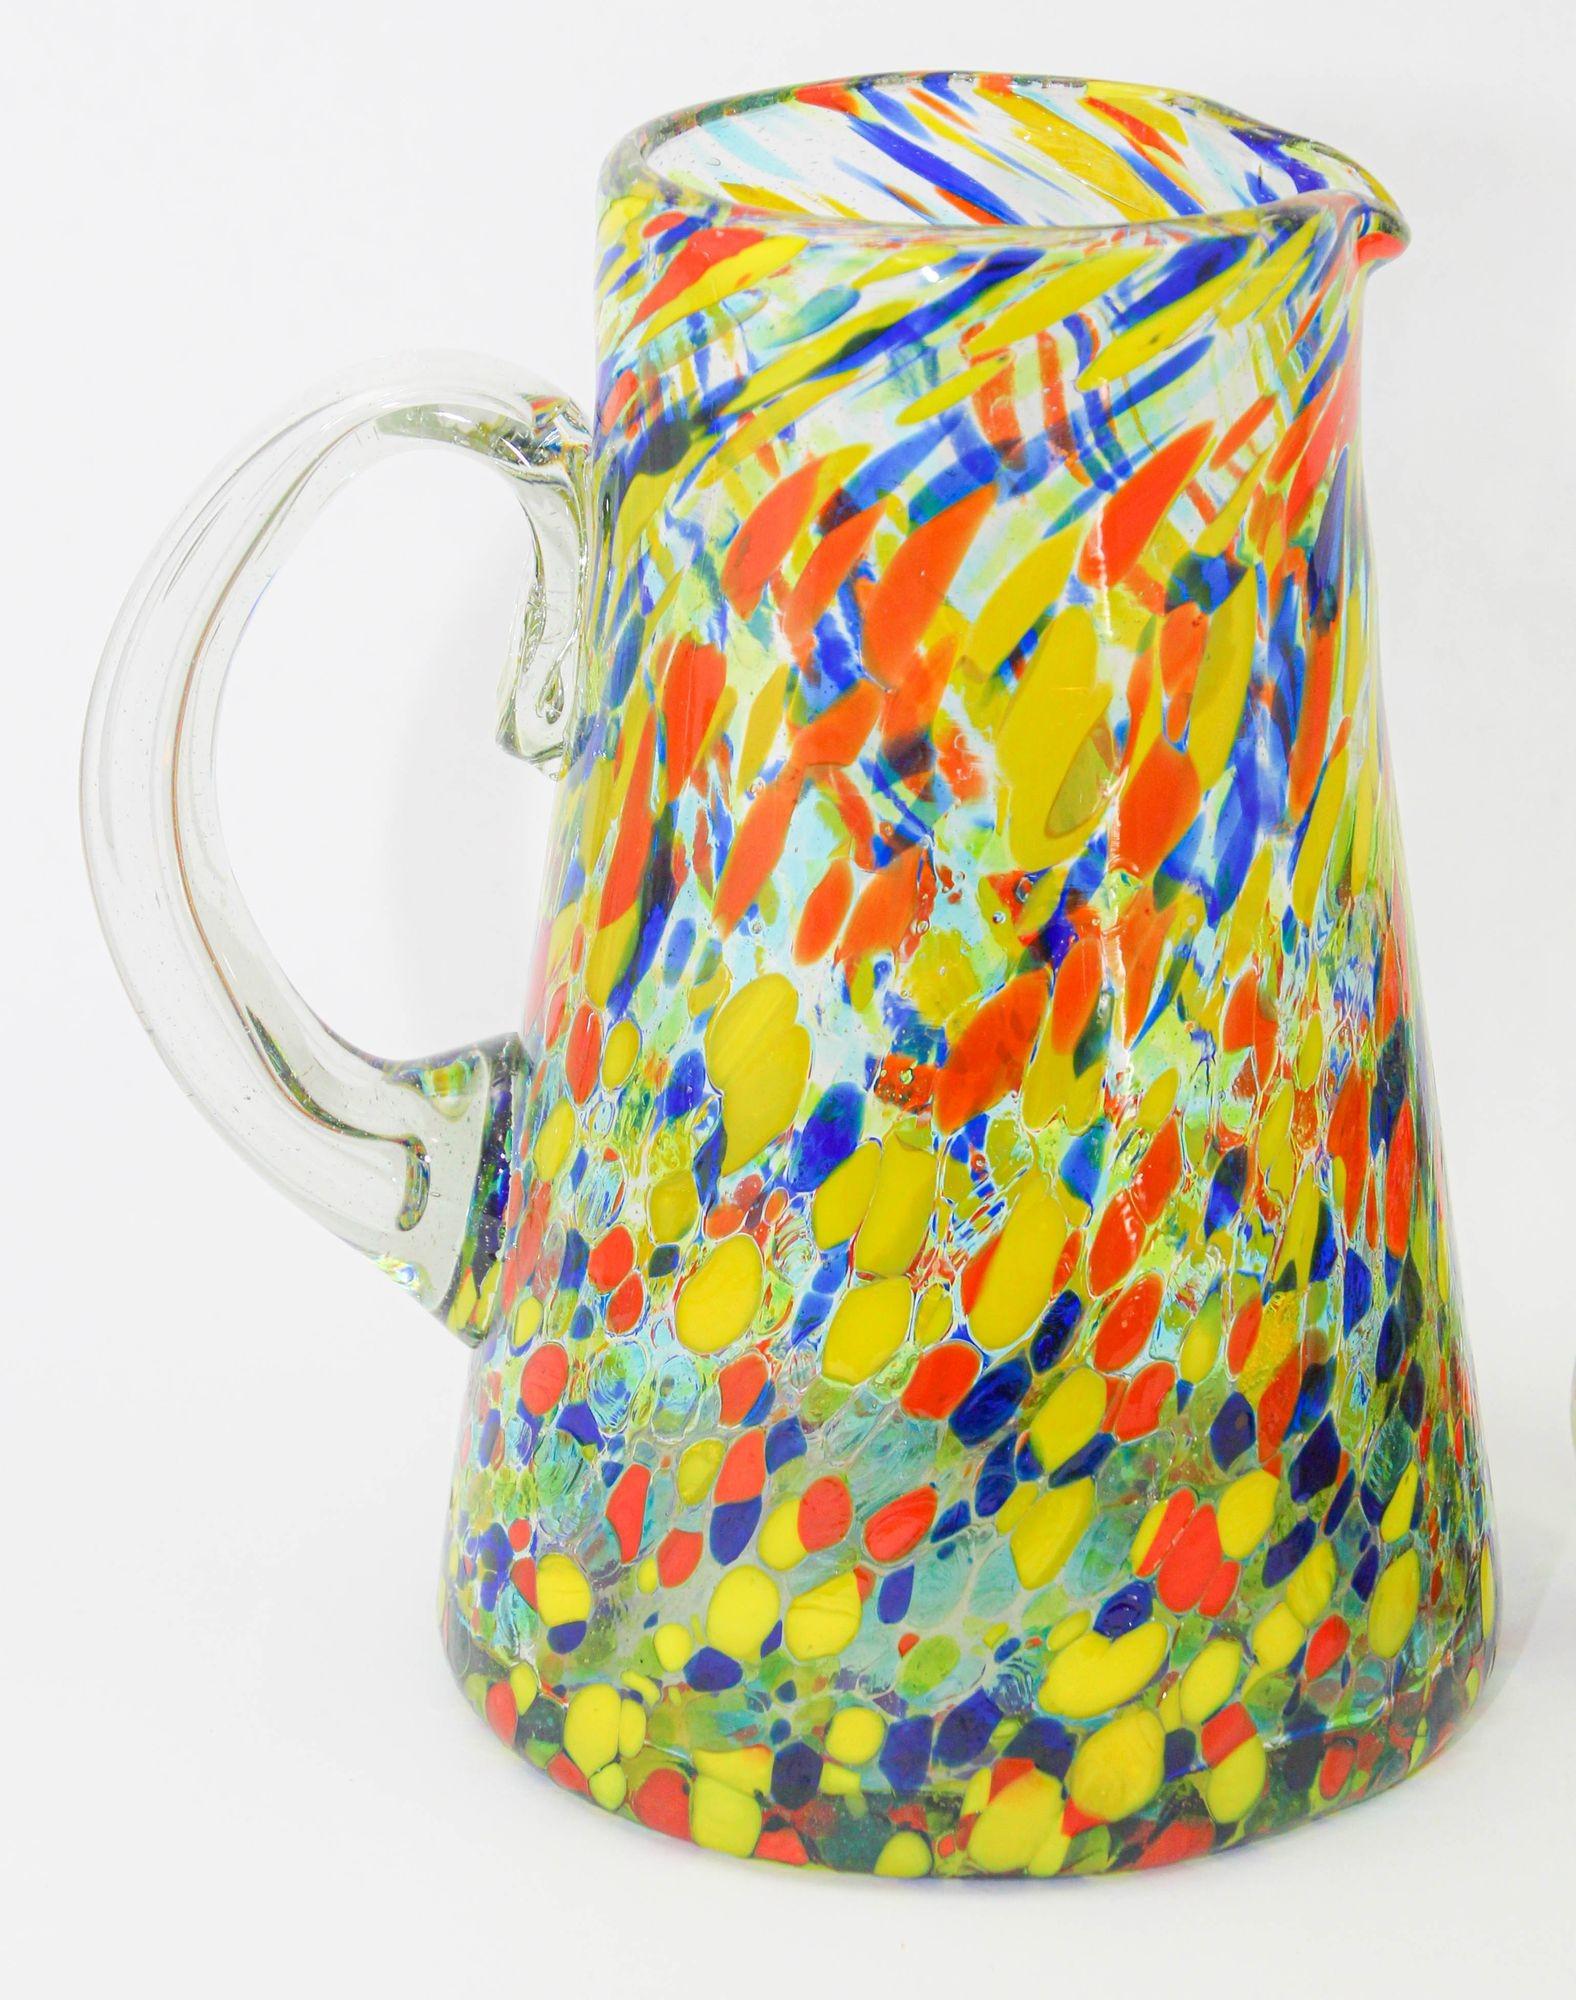 Hand Blown Multicolor Italian Murano Style Art Glass Jug Pitcher and Glasses.
Post Modern Pitcher and Glasses Set of Colorful Art Glass.
The set of three glasses and pitcher are hand blown with colorful different design, each one is unique.
Hand